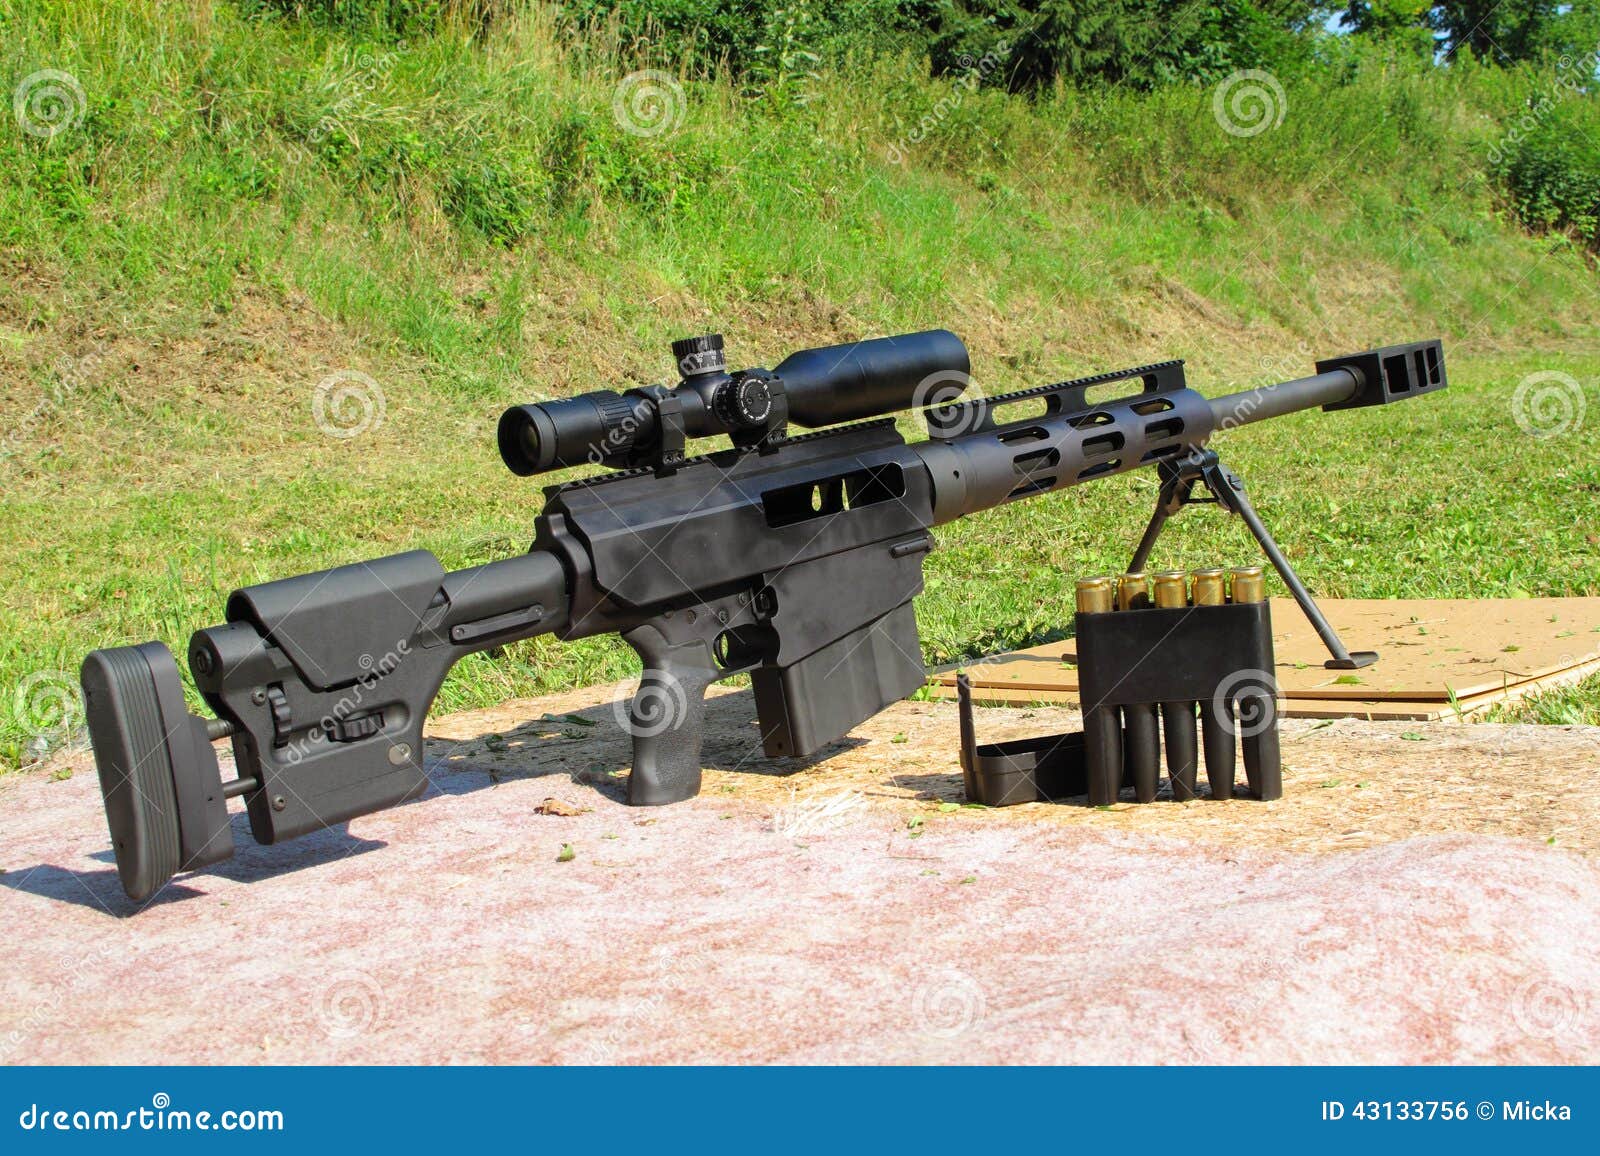 sniper rifle caliber .50 bmg with ammo